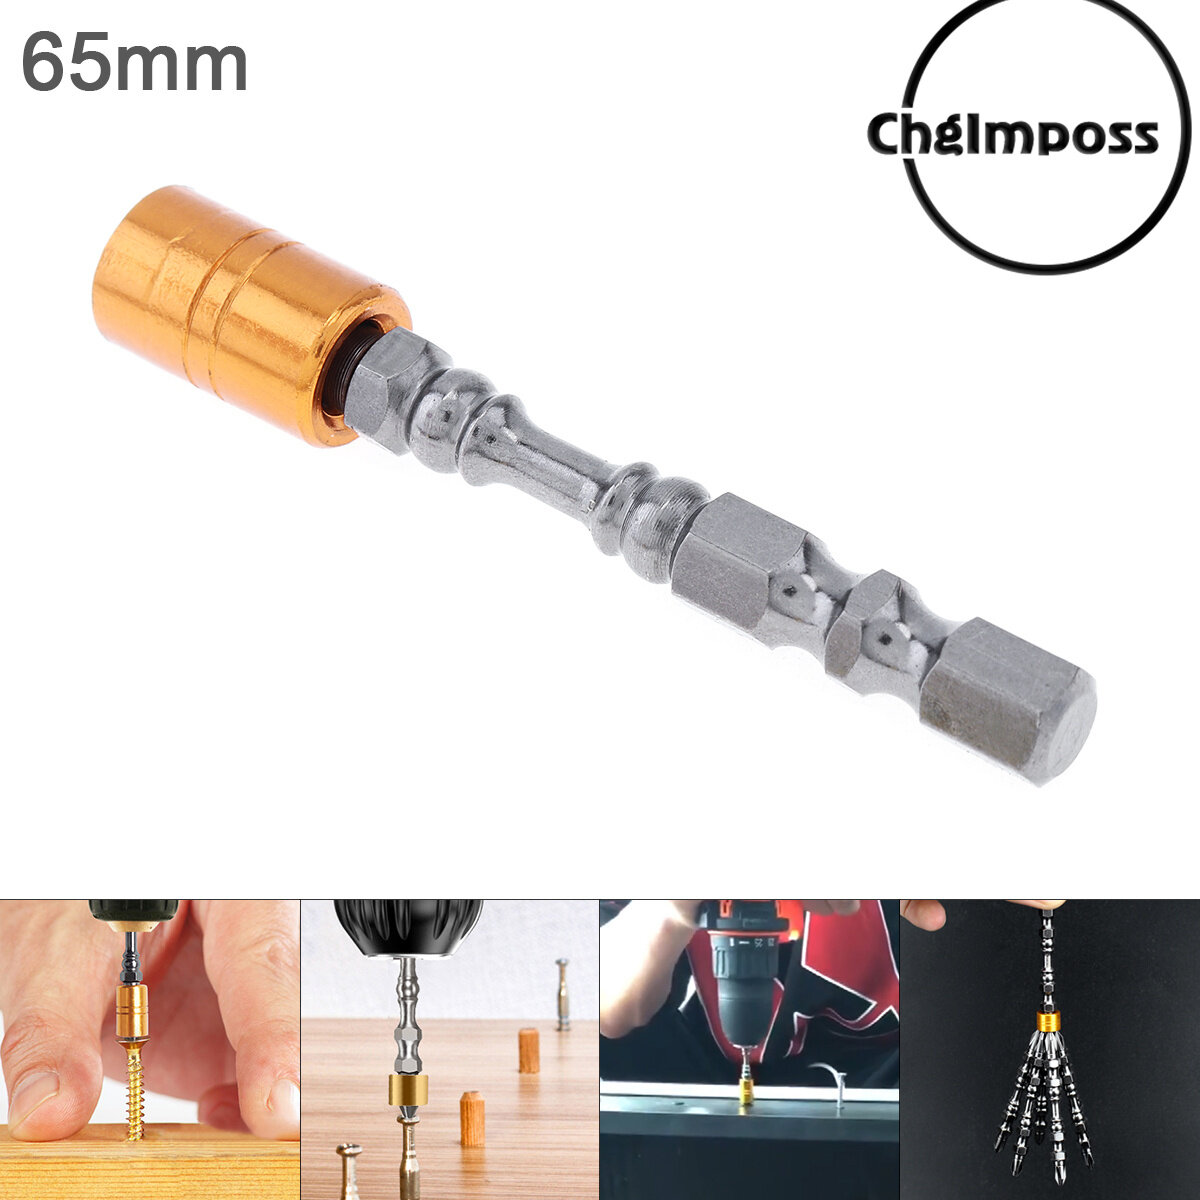 ChgImposs 65mm 1/4 Inch Magnetic Phillips Electric Screwdriver Bits for Absorb Broken Screws Drill Hole with Small Head Phillips Screw and Golden Circle